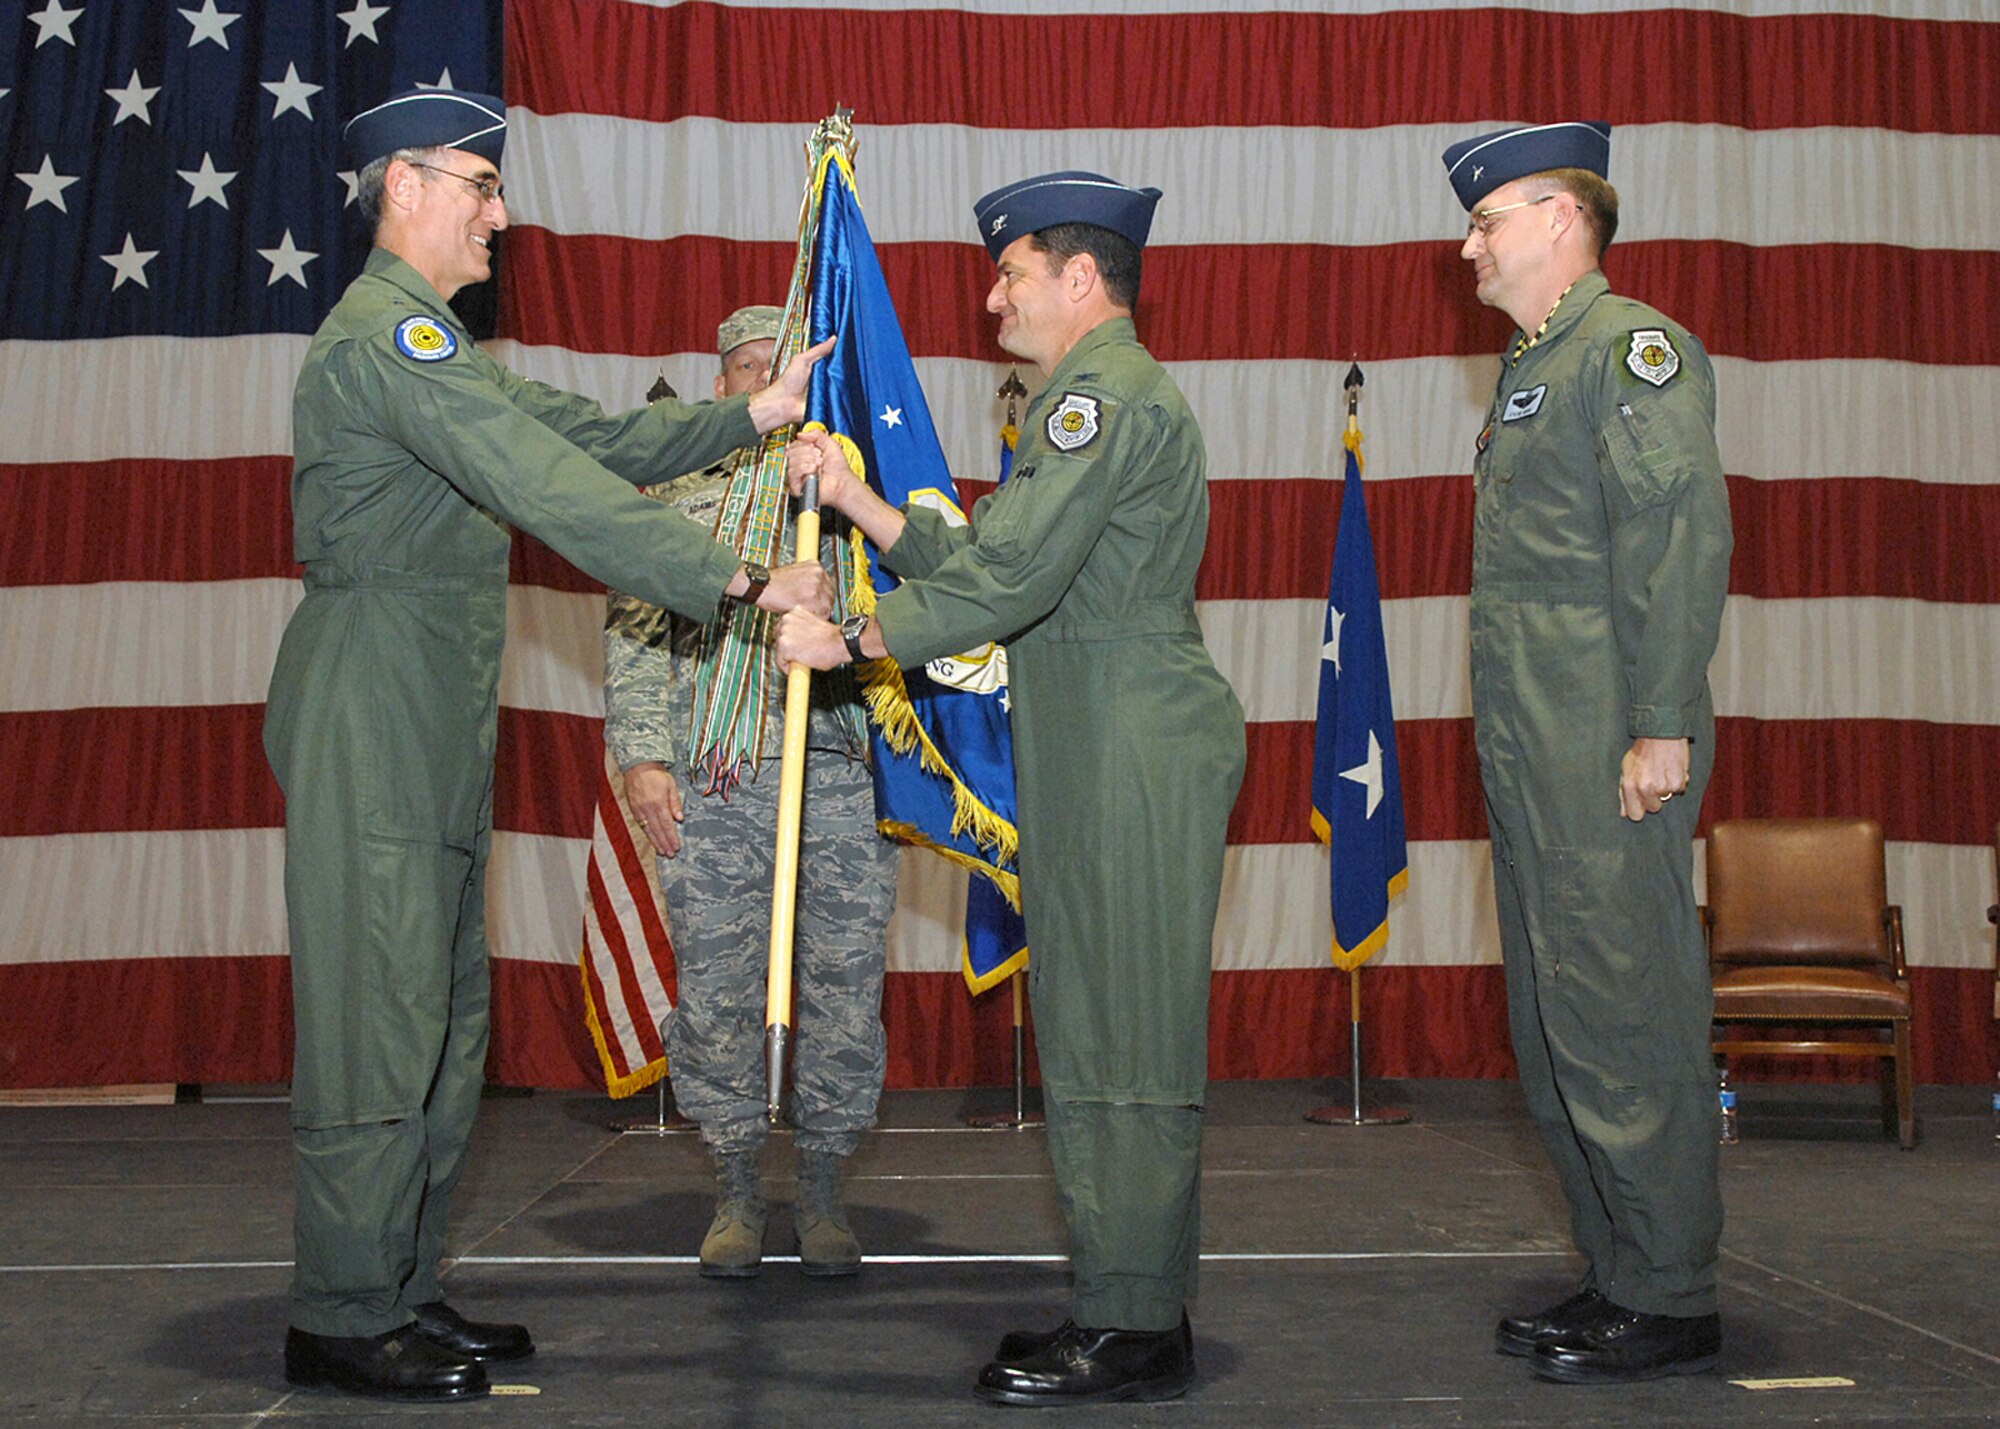 Maj. Gen. R. Mike Worden (left), U.S. Air Force Warfare Center commander, passes the 57th Wing guidon to Col. Russell Handy as outgoing 57th Wing commander Brig. Gen. Stephen Hoog (right) looks on during a change of command ceremony at the Thunderbird hangar here Jan. 18.  General Hoog relinquished command of the 57th Wing to Colonel Handy to take command of the U.S. Air Force Warfare Center. (U.S. Air Force photo by Senior Airman Kasabyan D. McGarvey) 